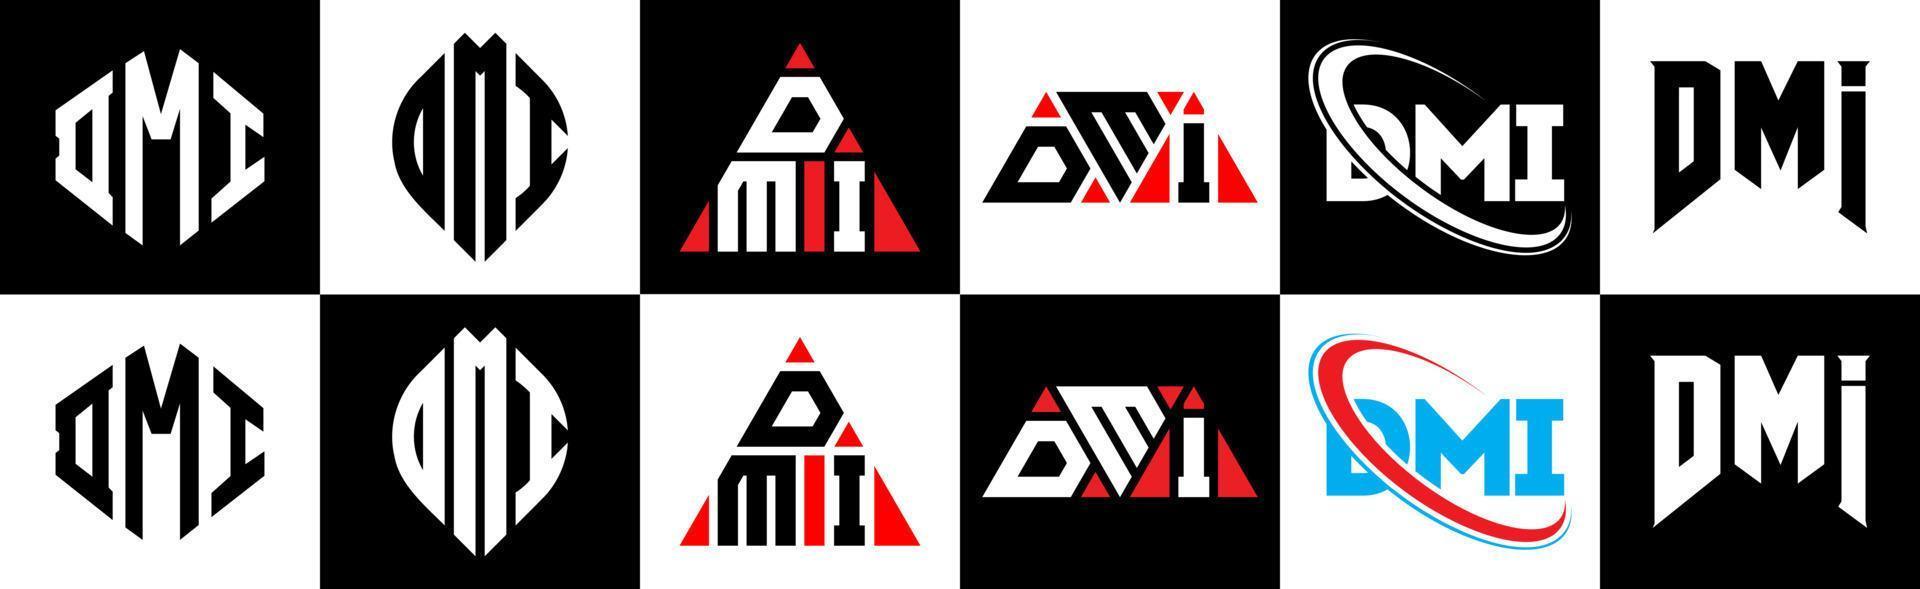 DMI letter logo design in six style. DMI polygon, circle, triangle, hexagon, flat and simple style with black and white color variation letter logo set in one artboard. DMI minimalist and classic logo vector